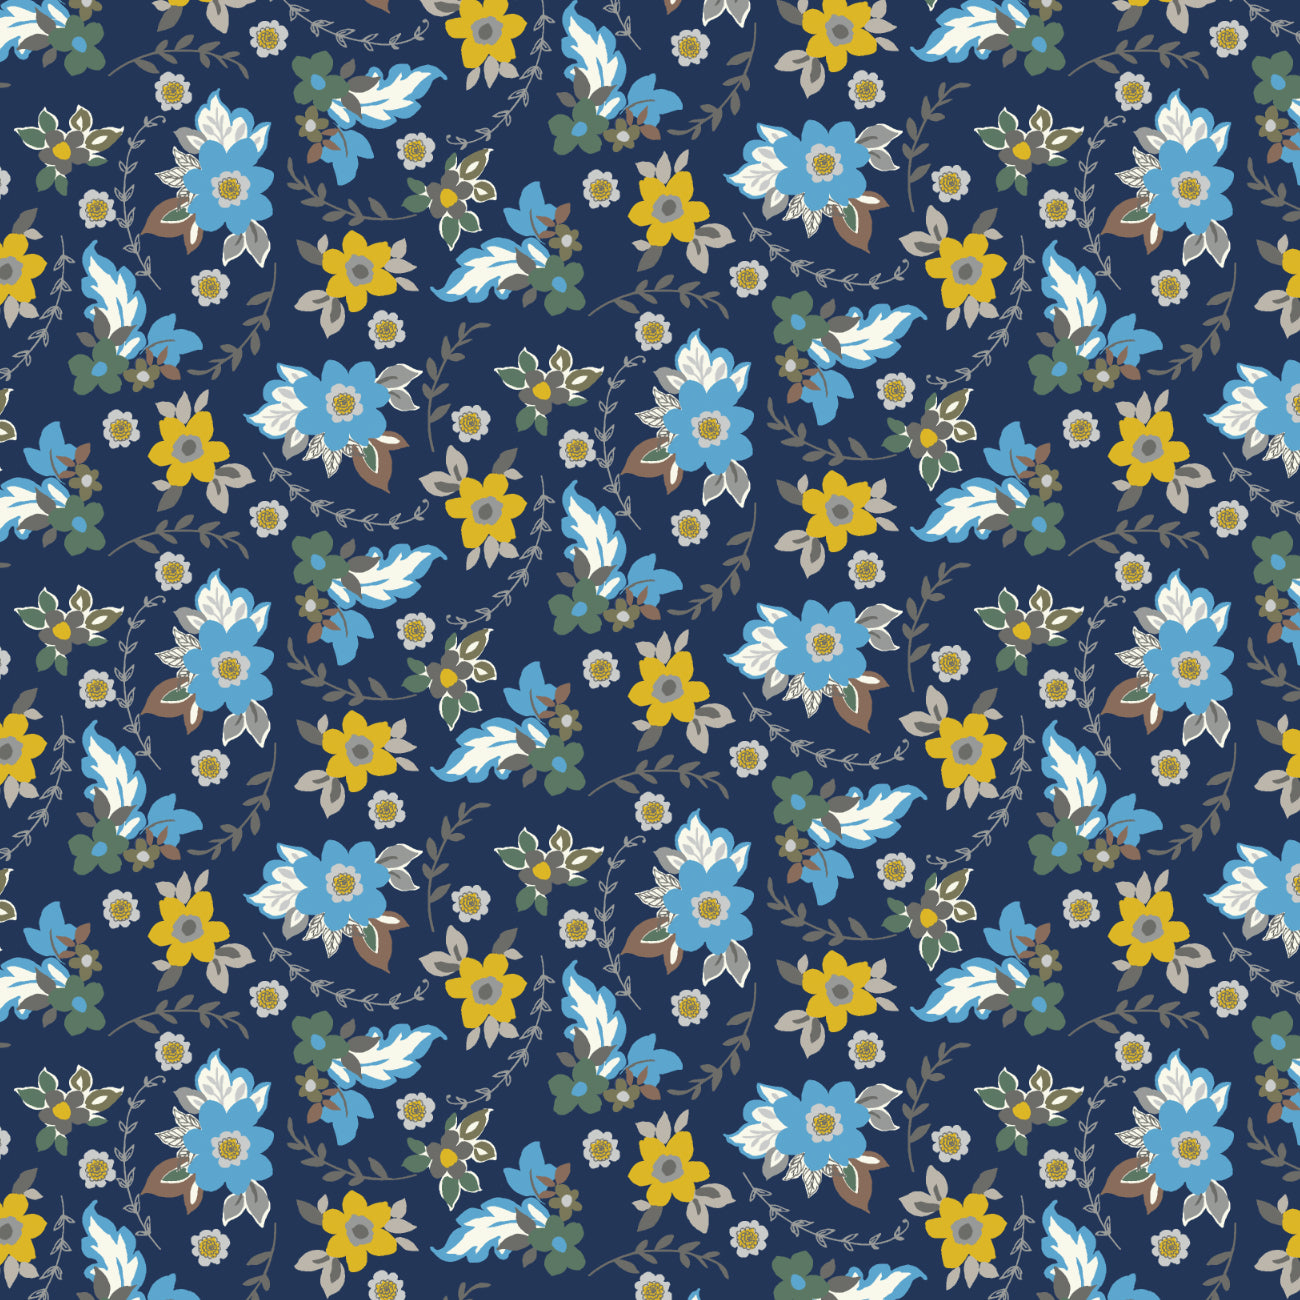 Winter Paisley Collection-Paisley Blooms-100% Cotton-Blue-21231004-01